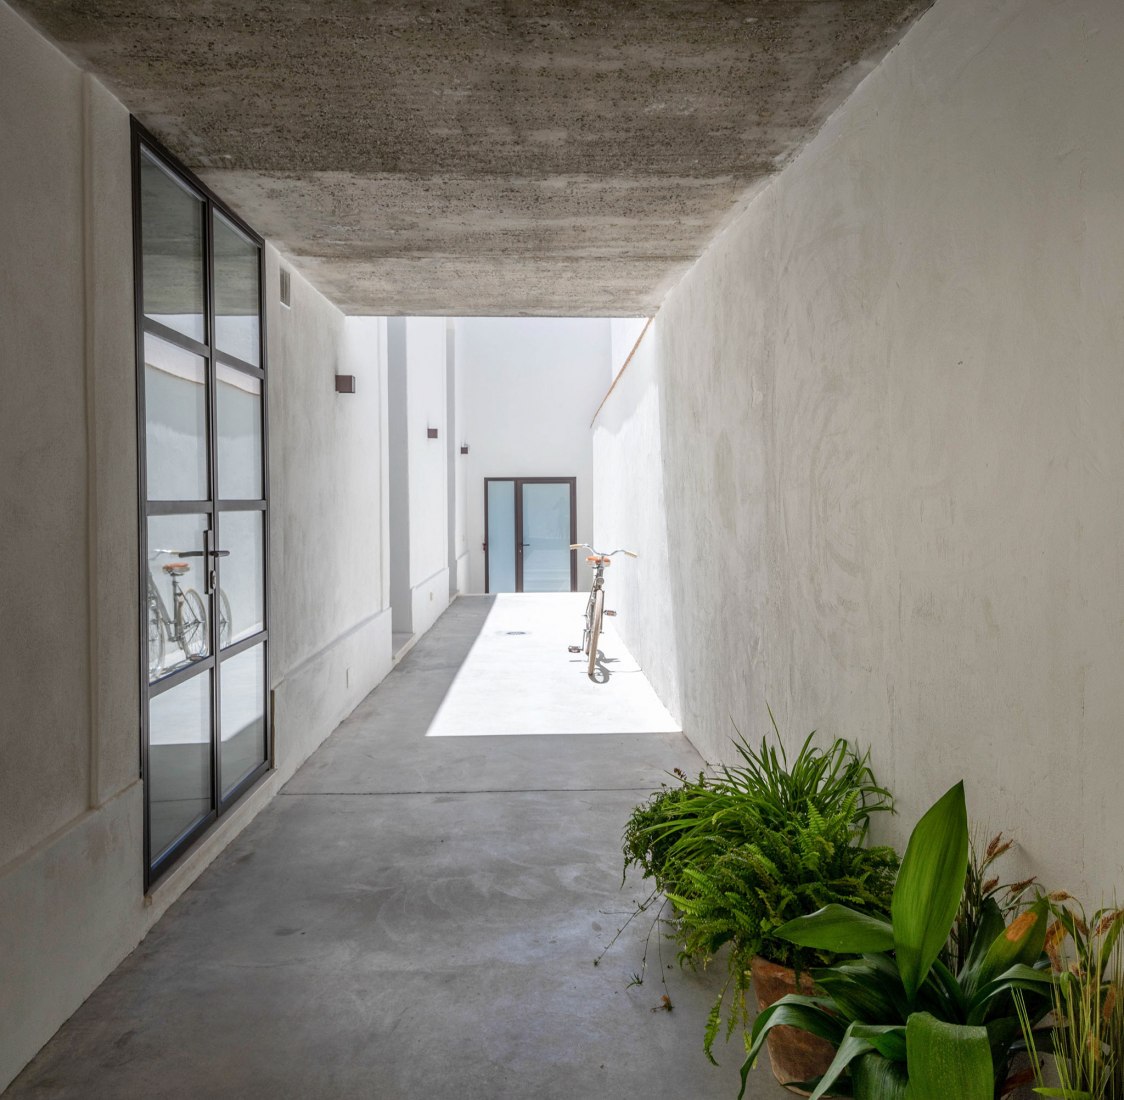 Housing in a Bodega de Jerez by Iniesta Nowell Arquitectos. Photograph by Rafael Iniesta Nowell.